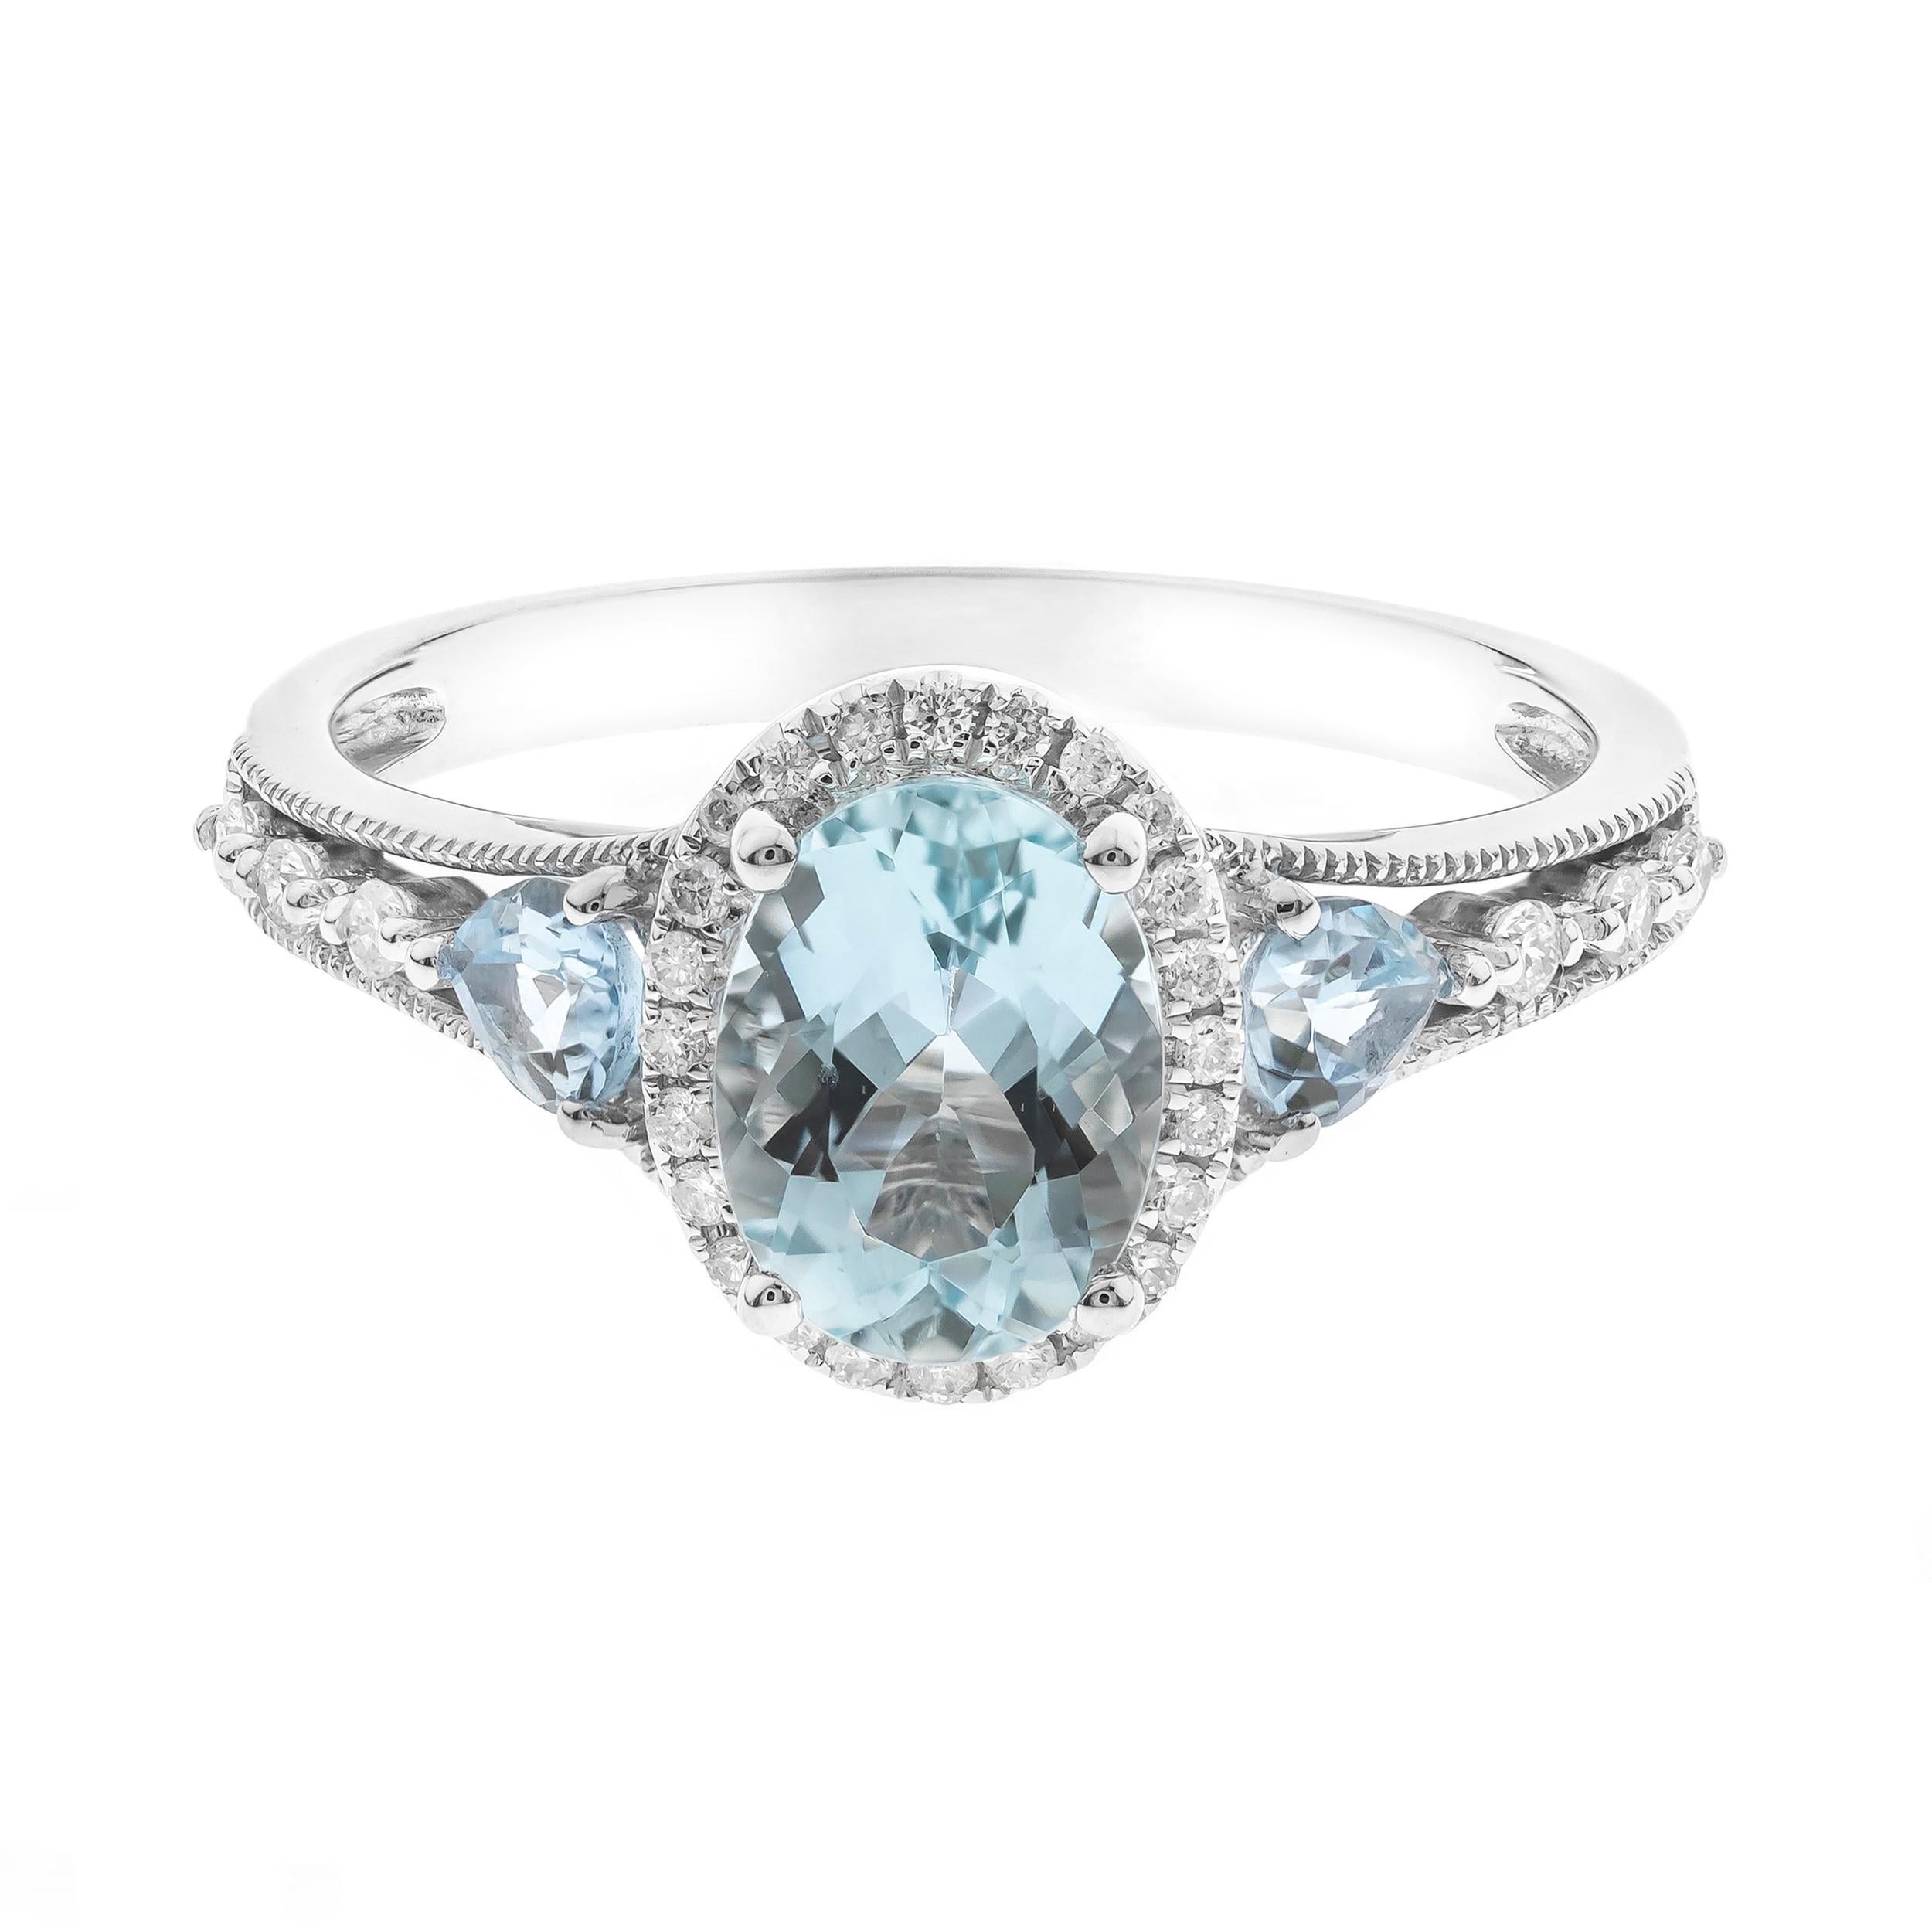 Stunning, timeless and classy eternity Unique Ring. Decorate yourself in luxury with this Gin & Grace Ring. The 14K Yellow Gold jewelry boasts 8x6 mm (1 pcs) 1.10 carat Oval-Cut, 4x3 mm (2 pcs) 0.28 carat Pear-cut Aquamarine, along with Natural